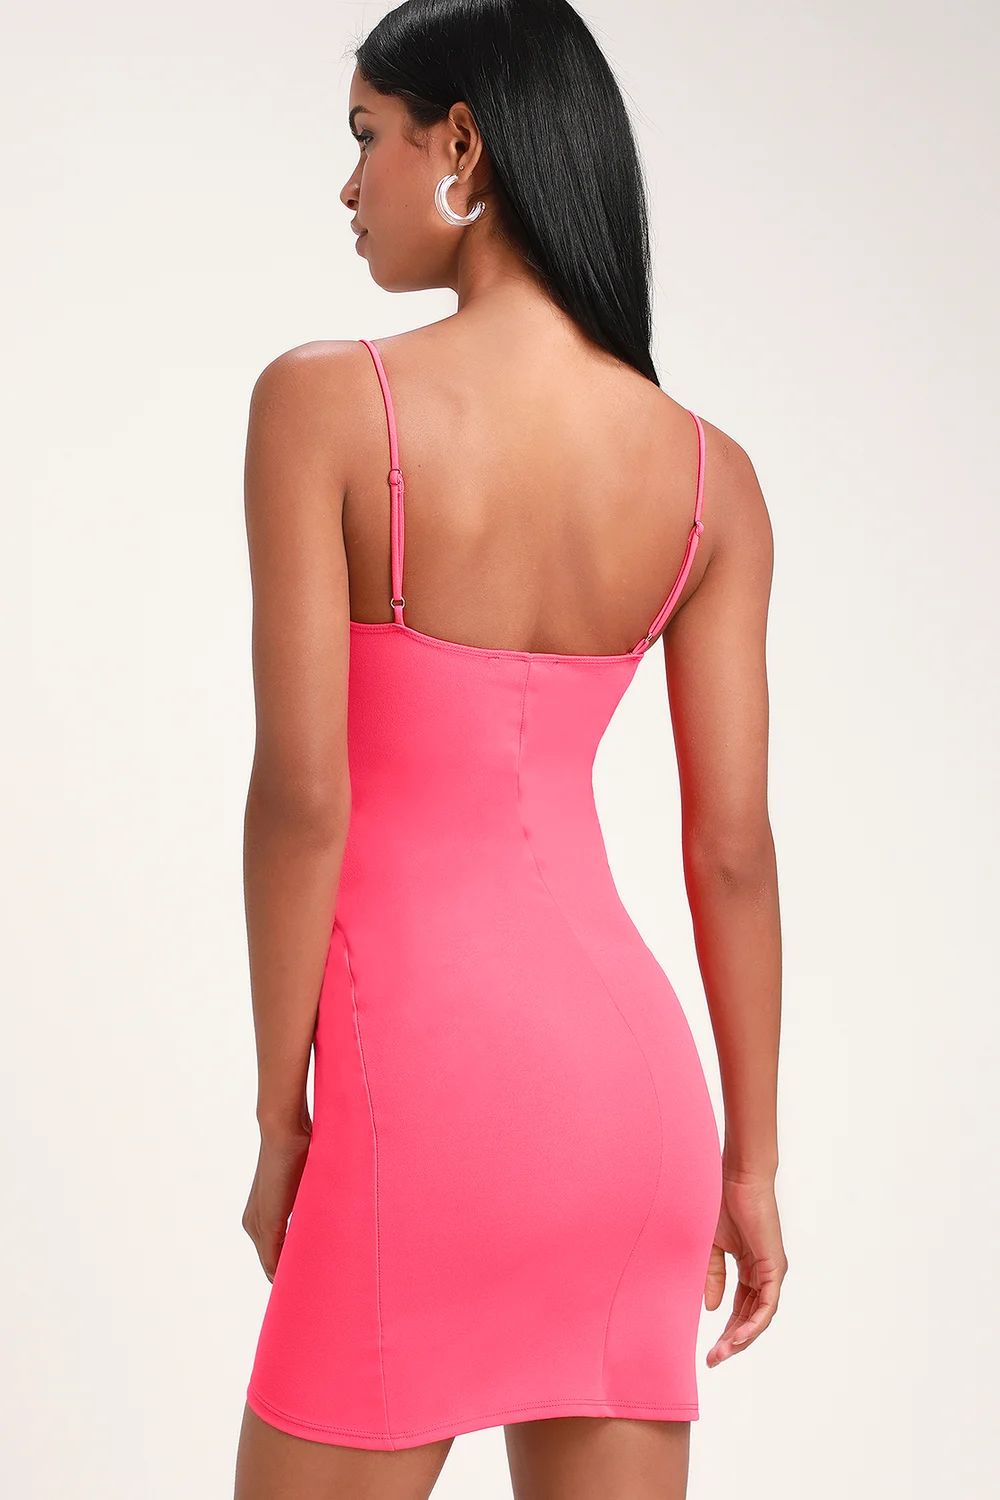 Cutout On The Town Hot Pink Cutout Bodycon Dress | Lulus (US)